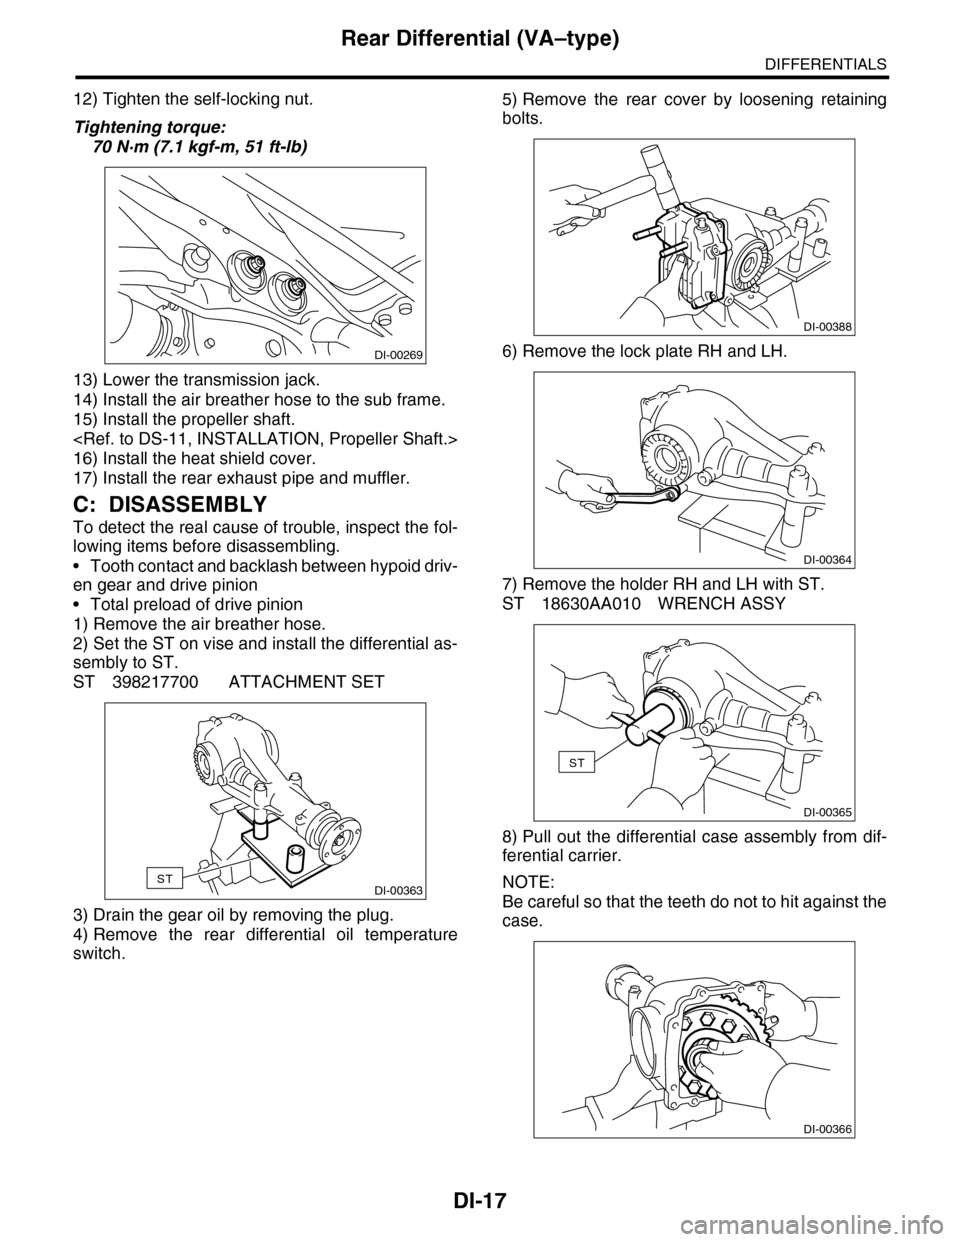 SUBARU TRIBECA 2009 1.G Service Workshop Manual DI-17
Rear Differential (VA–type)
DIFFERENTIALS
12) Tighten the self-locking nut.
Tightening torque:
70 N·m (7.1 kgf-m, 51 ft-lb)
13) Lower the transmission jack.
14) Install the air breather hose 